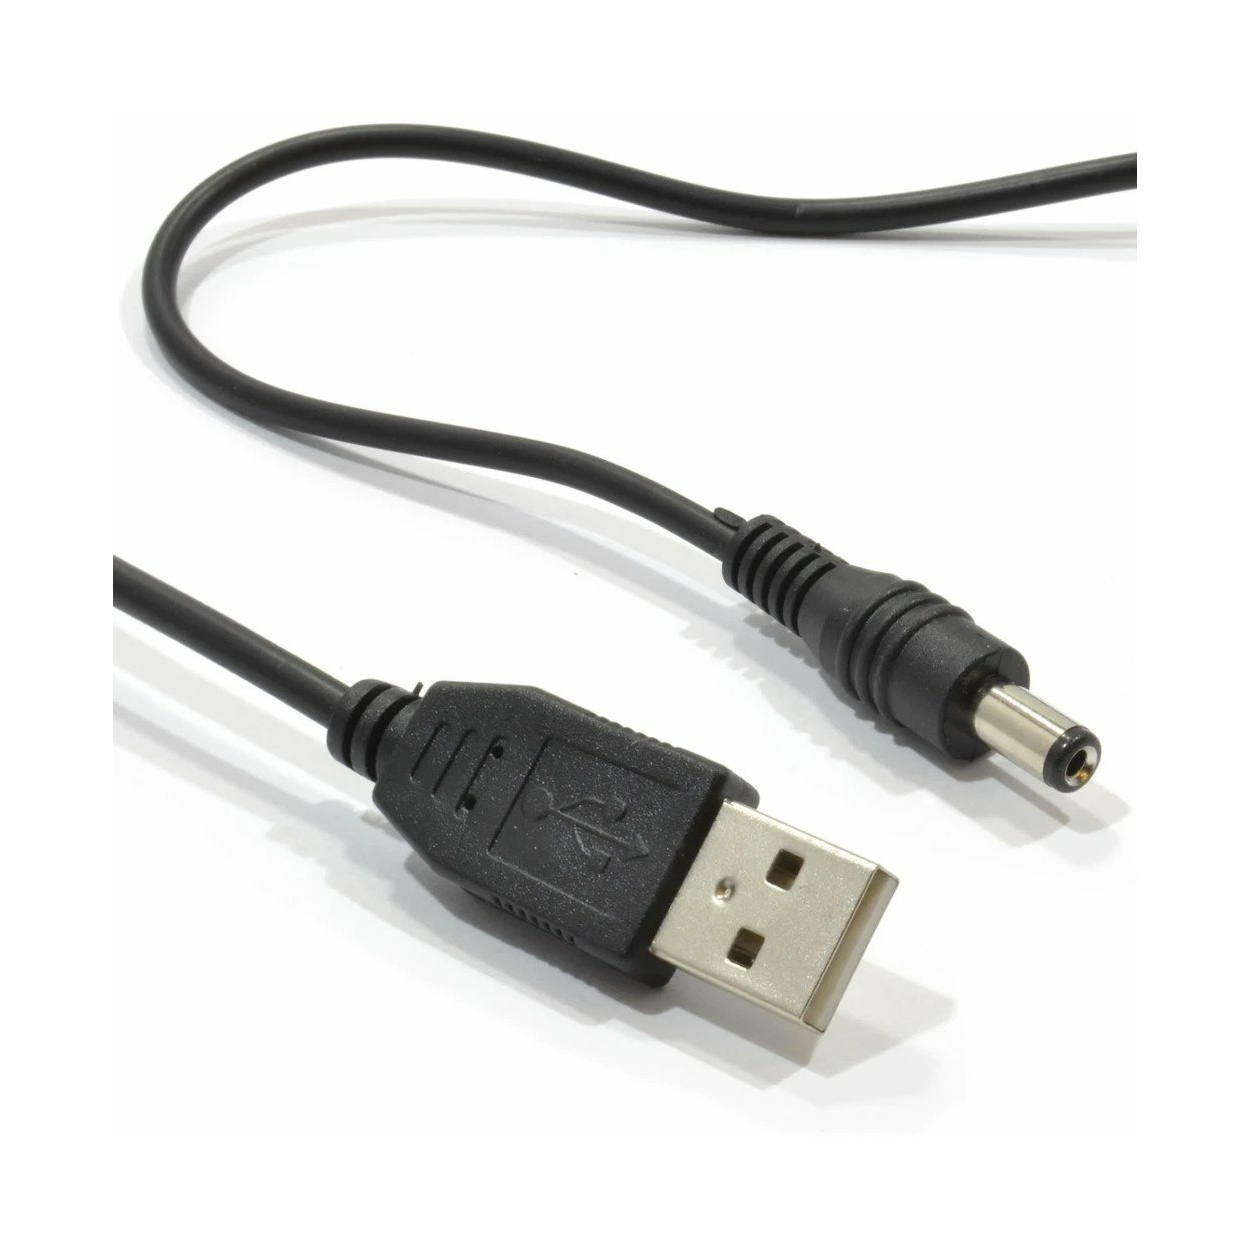 DUB05001 Adapter cable USB-C to DC hollow plug 5.5 mm - FeinTech